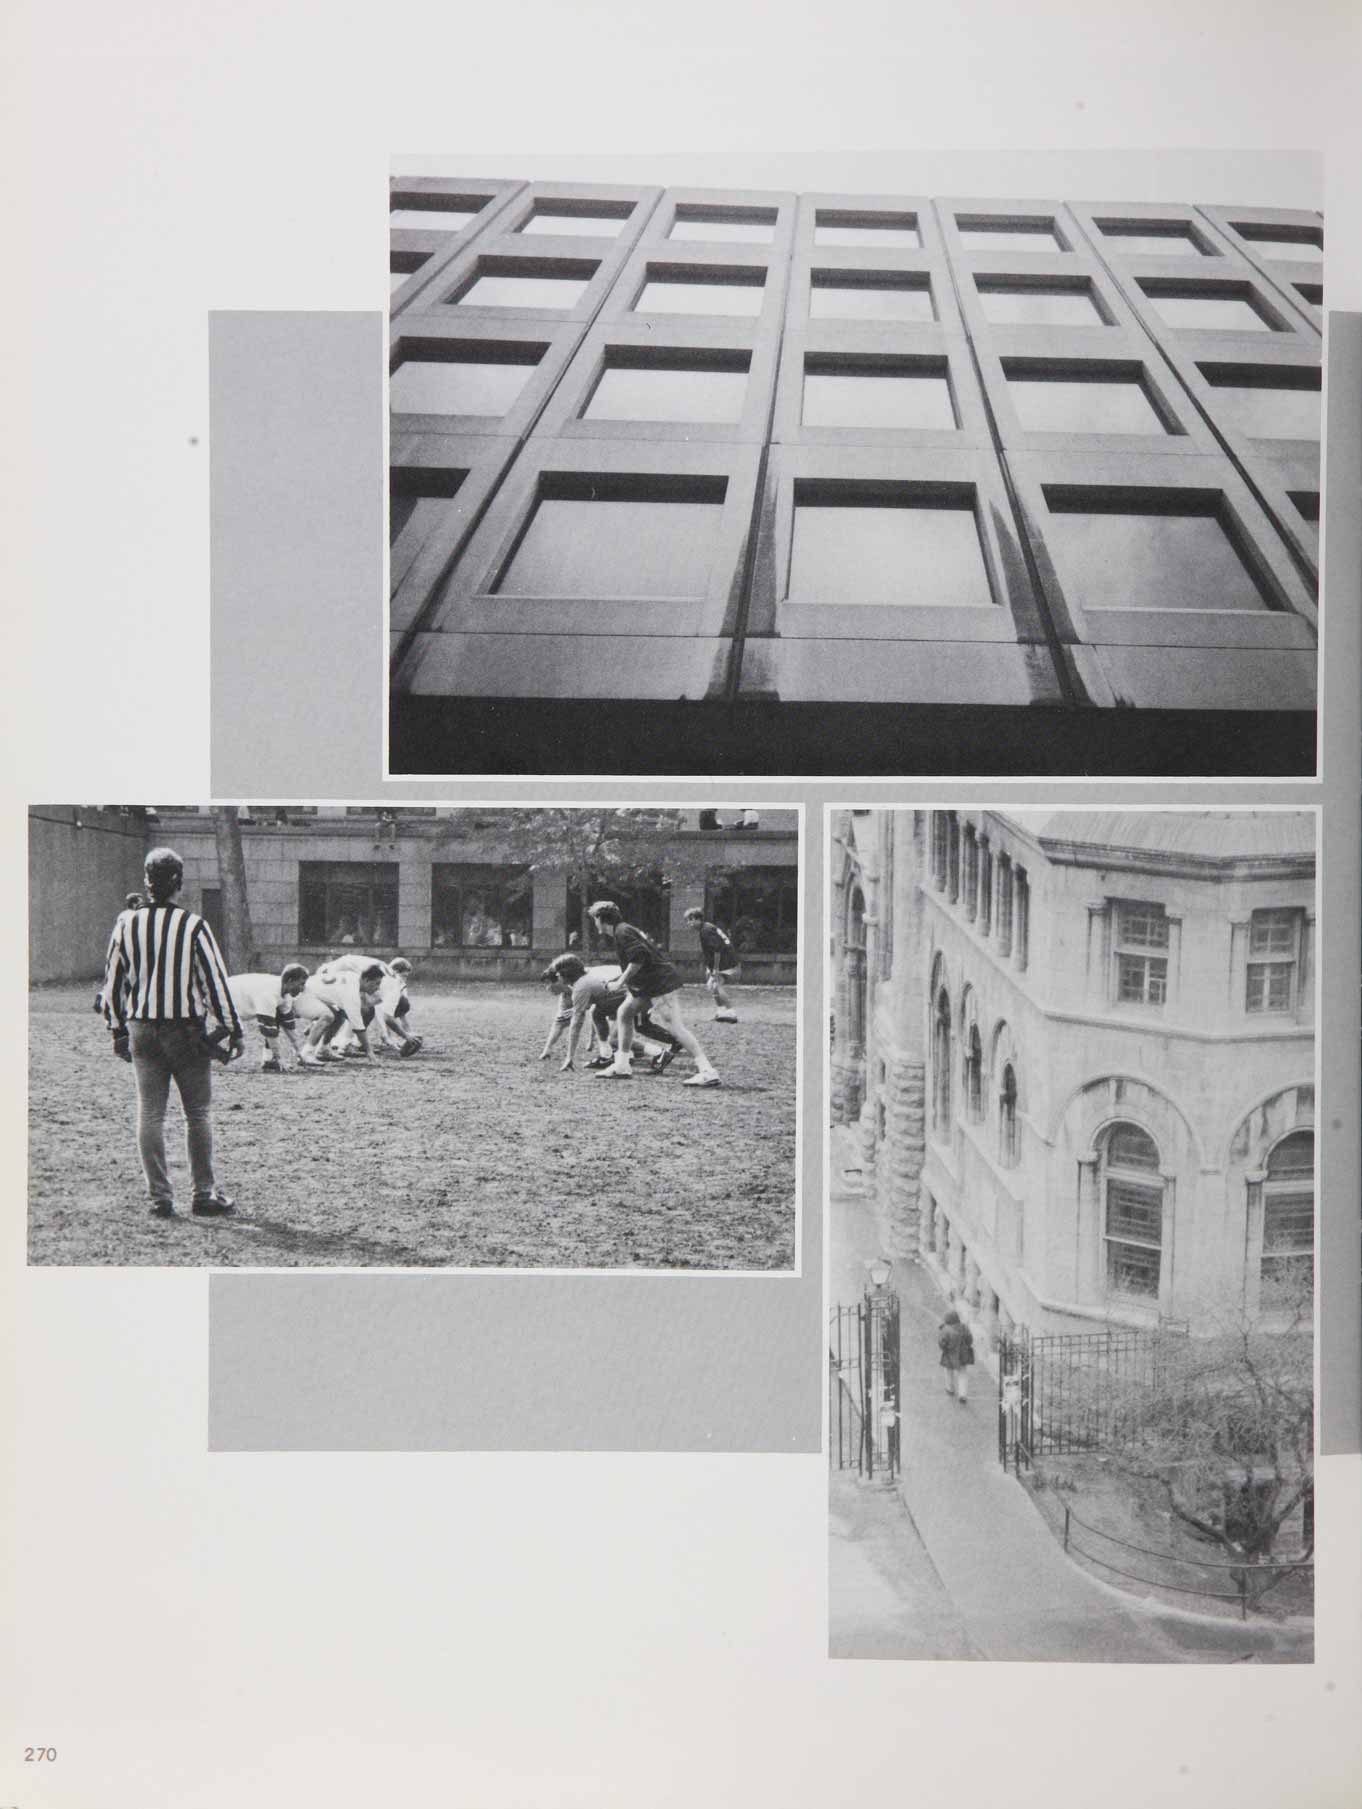 McGill Yearbook: 1992